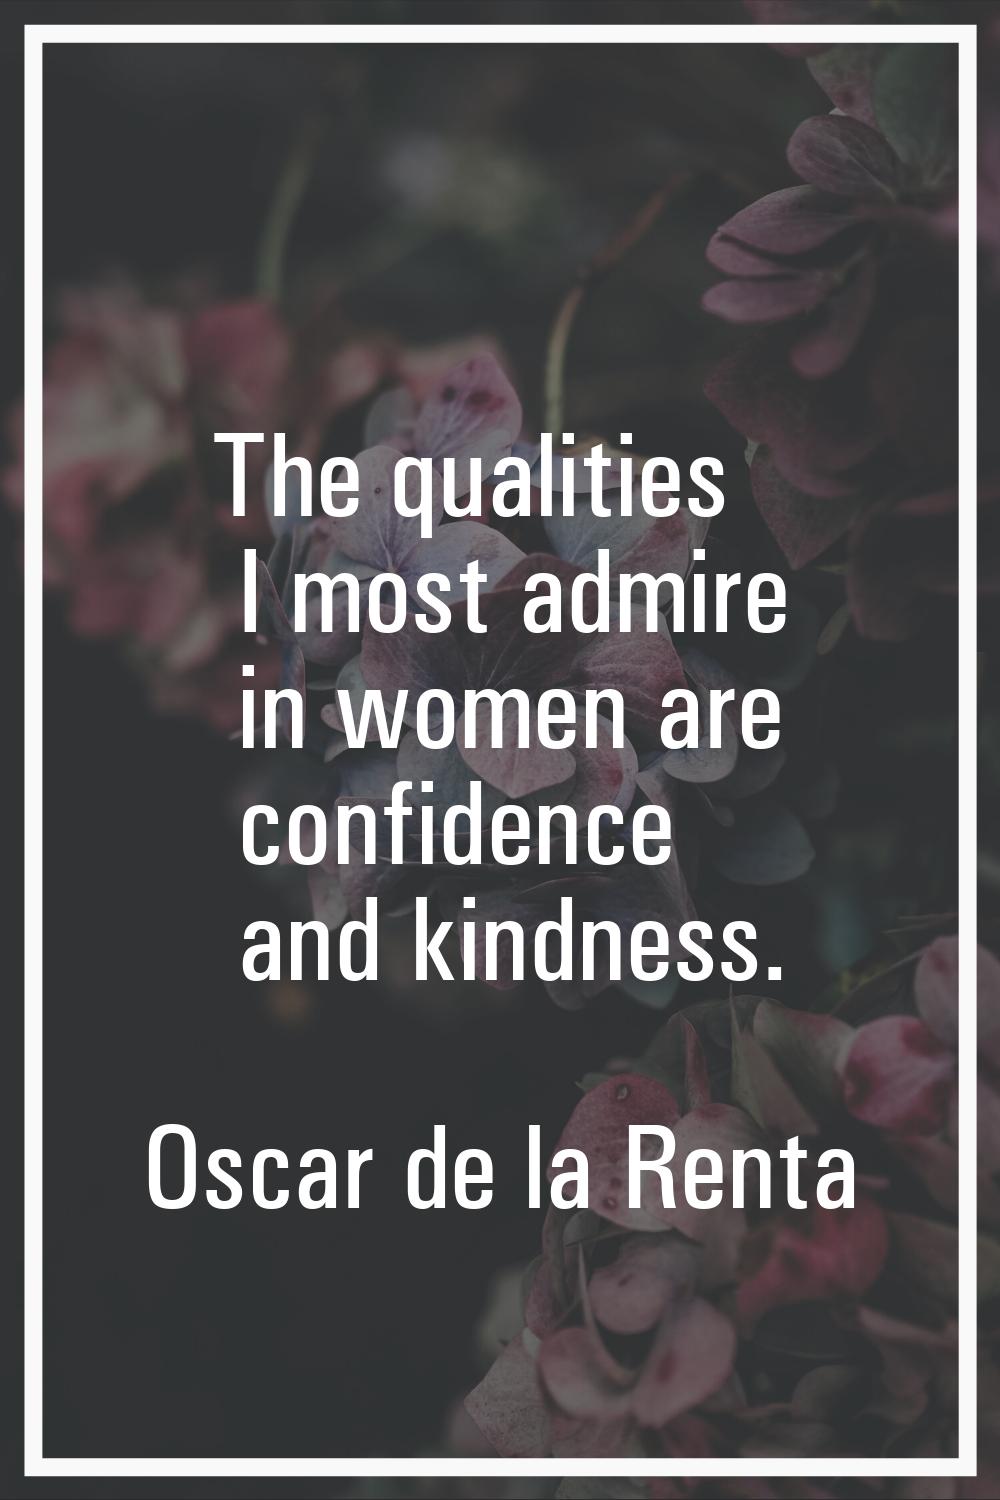 The qualities I most admire in women are confidence and kindness.